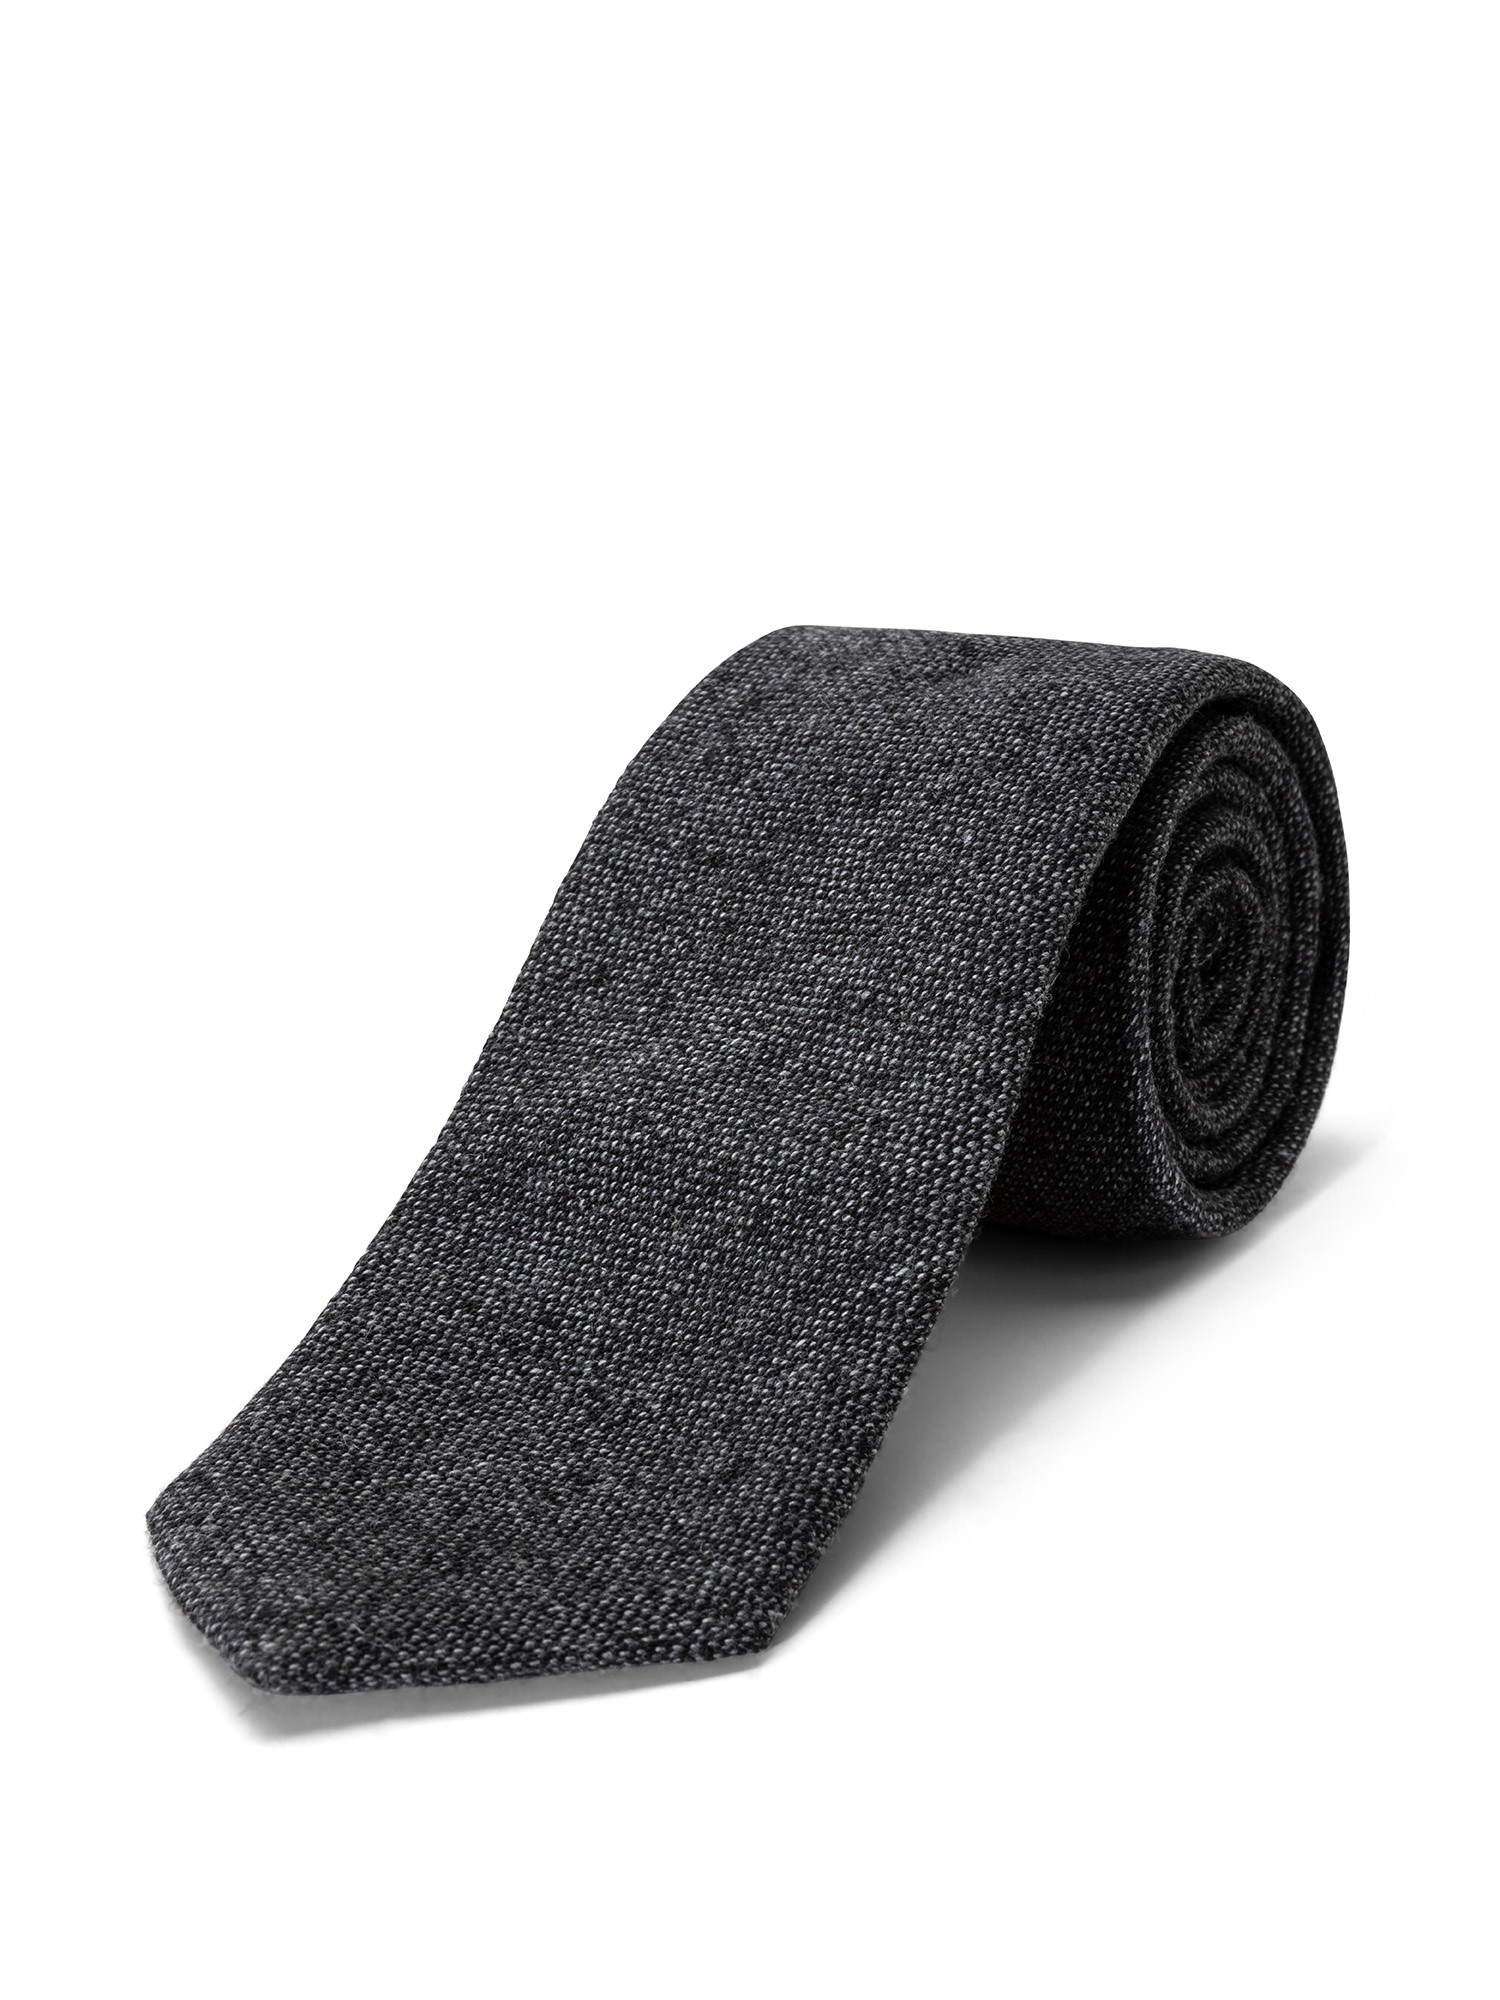 Luca D'Altieri - Patterned wool and silk tie, Anthracite, large image number 0